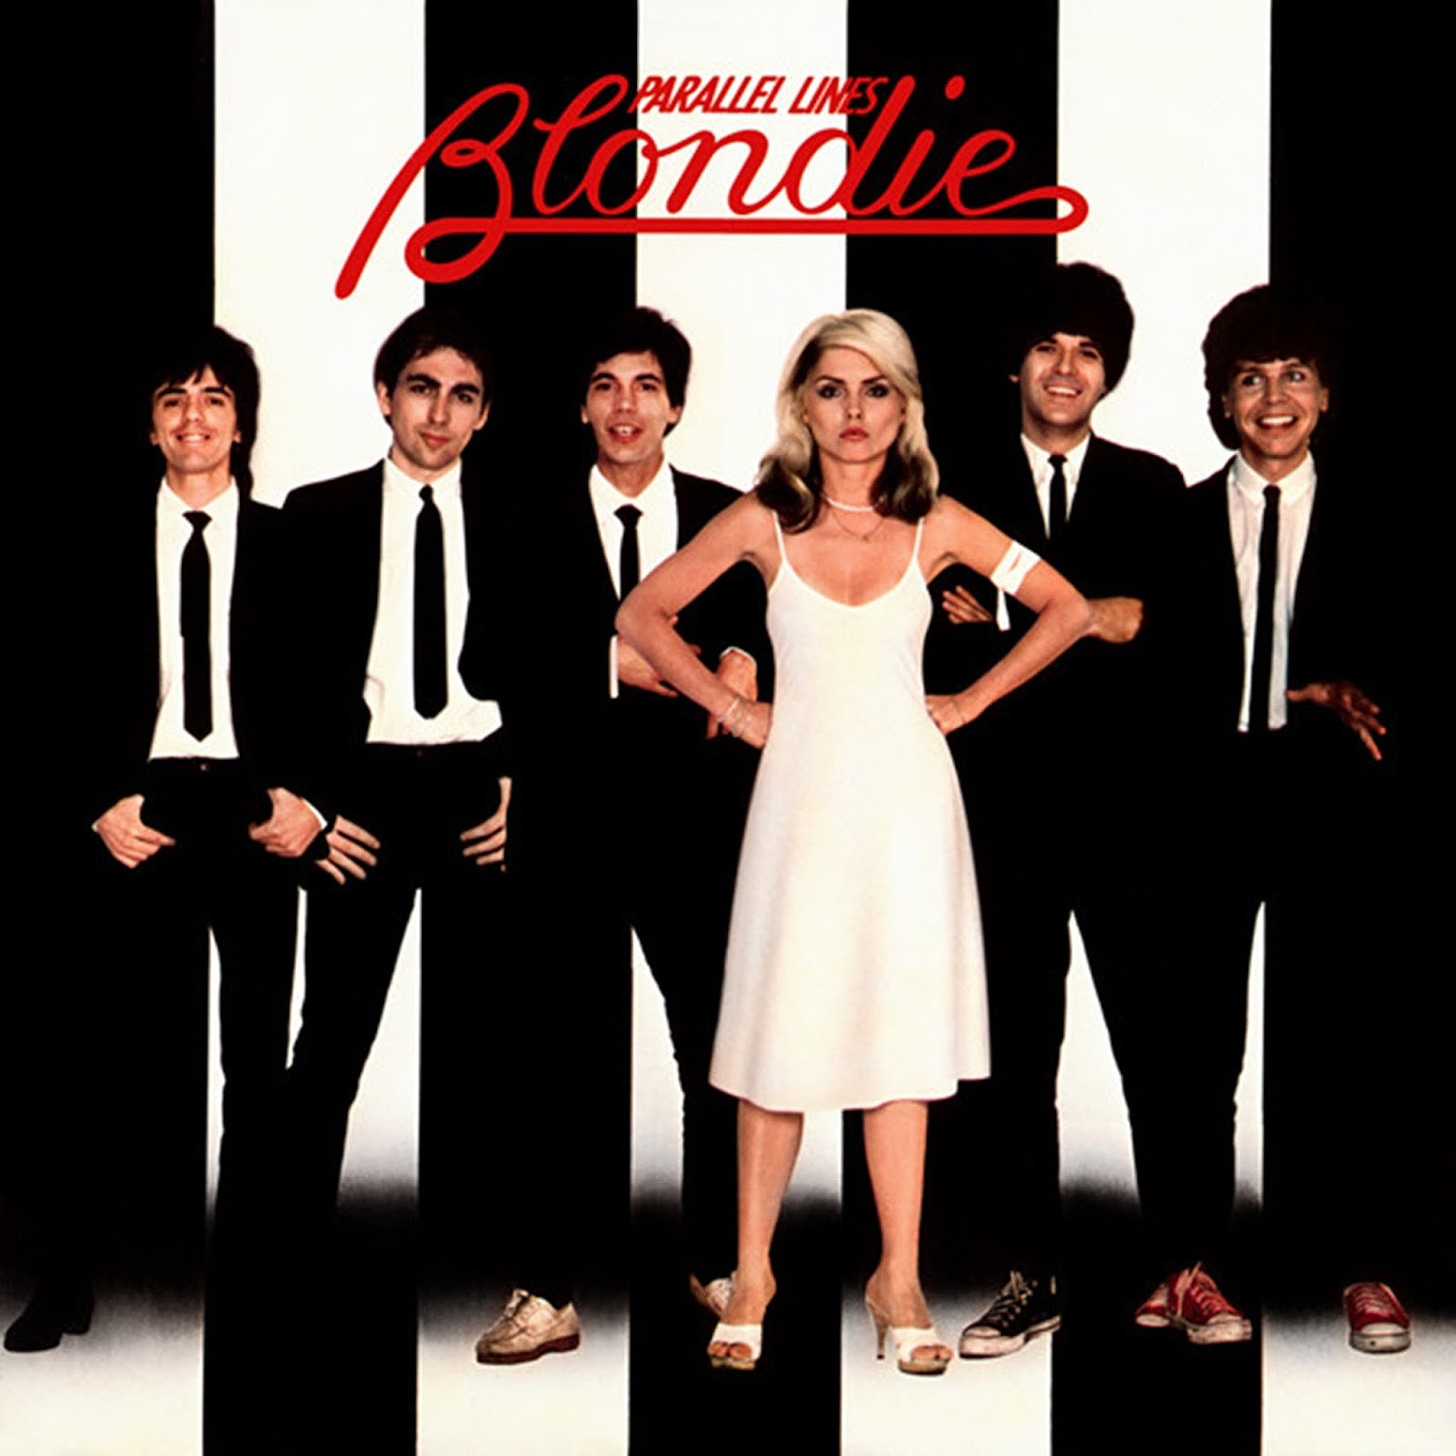 Full Albums: Blondie's 'Parallel Lines' - Cover Me